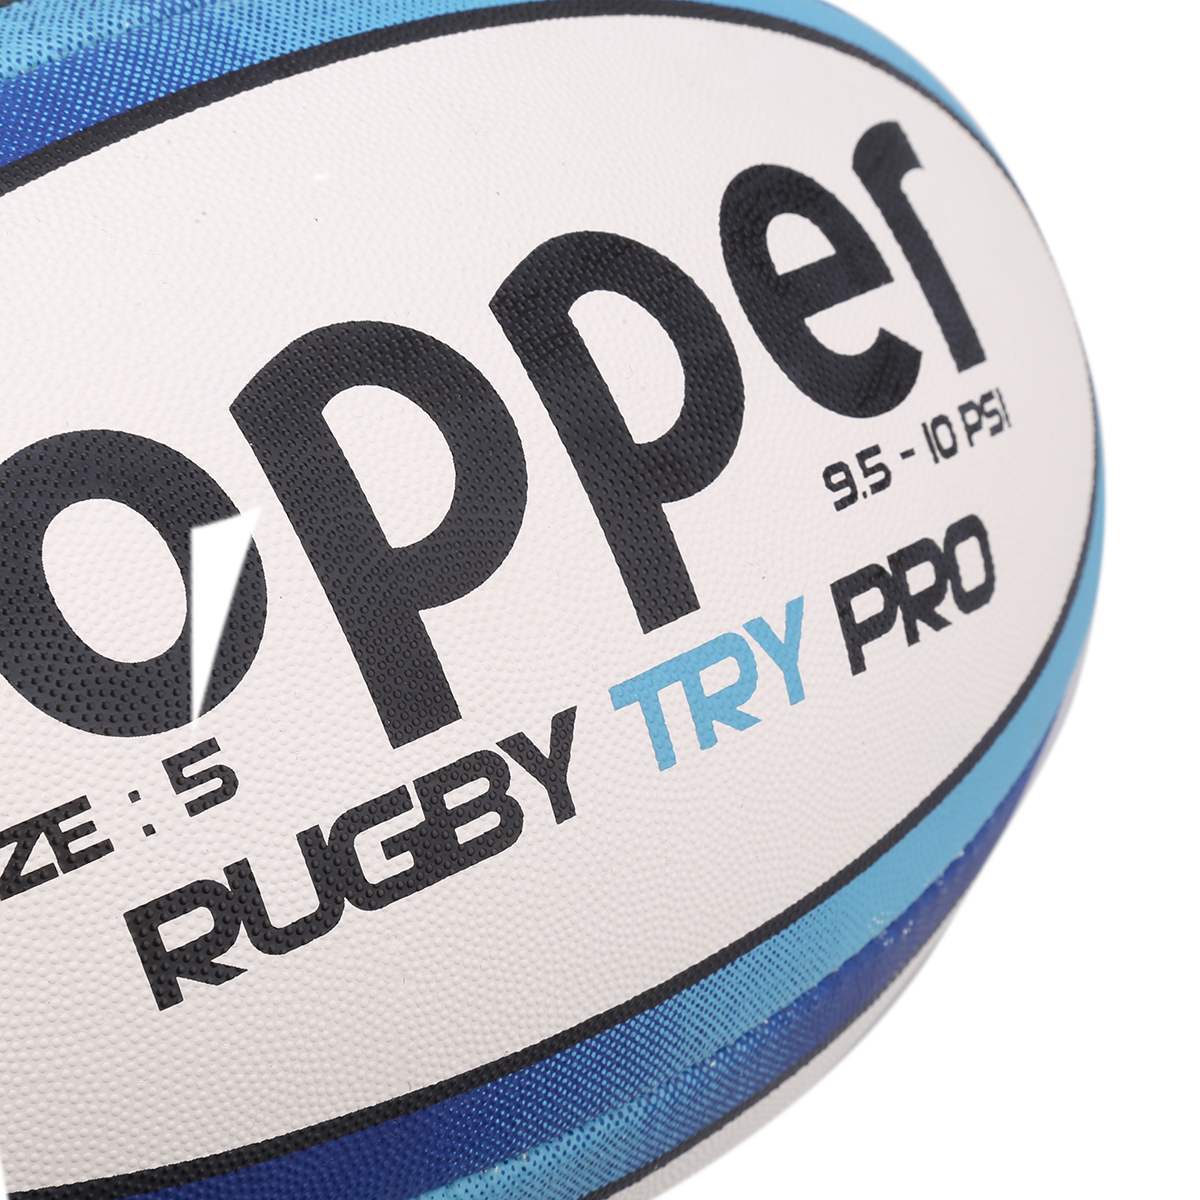 Pelota Topper Try Pro,  image number null